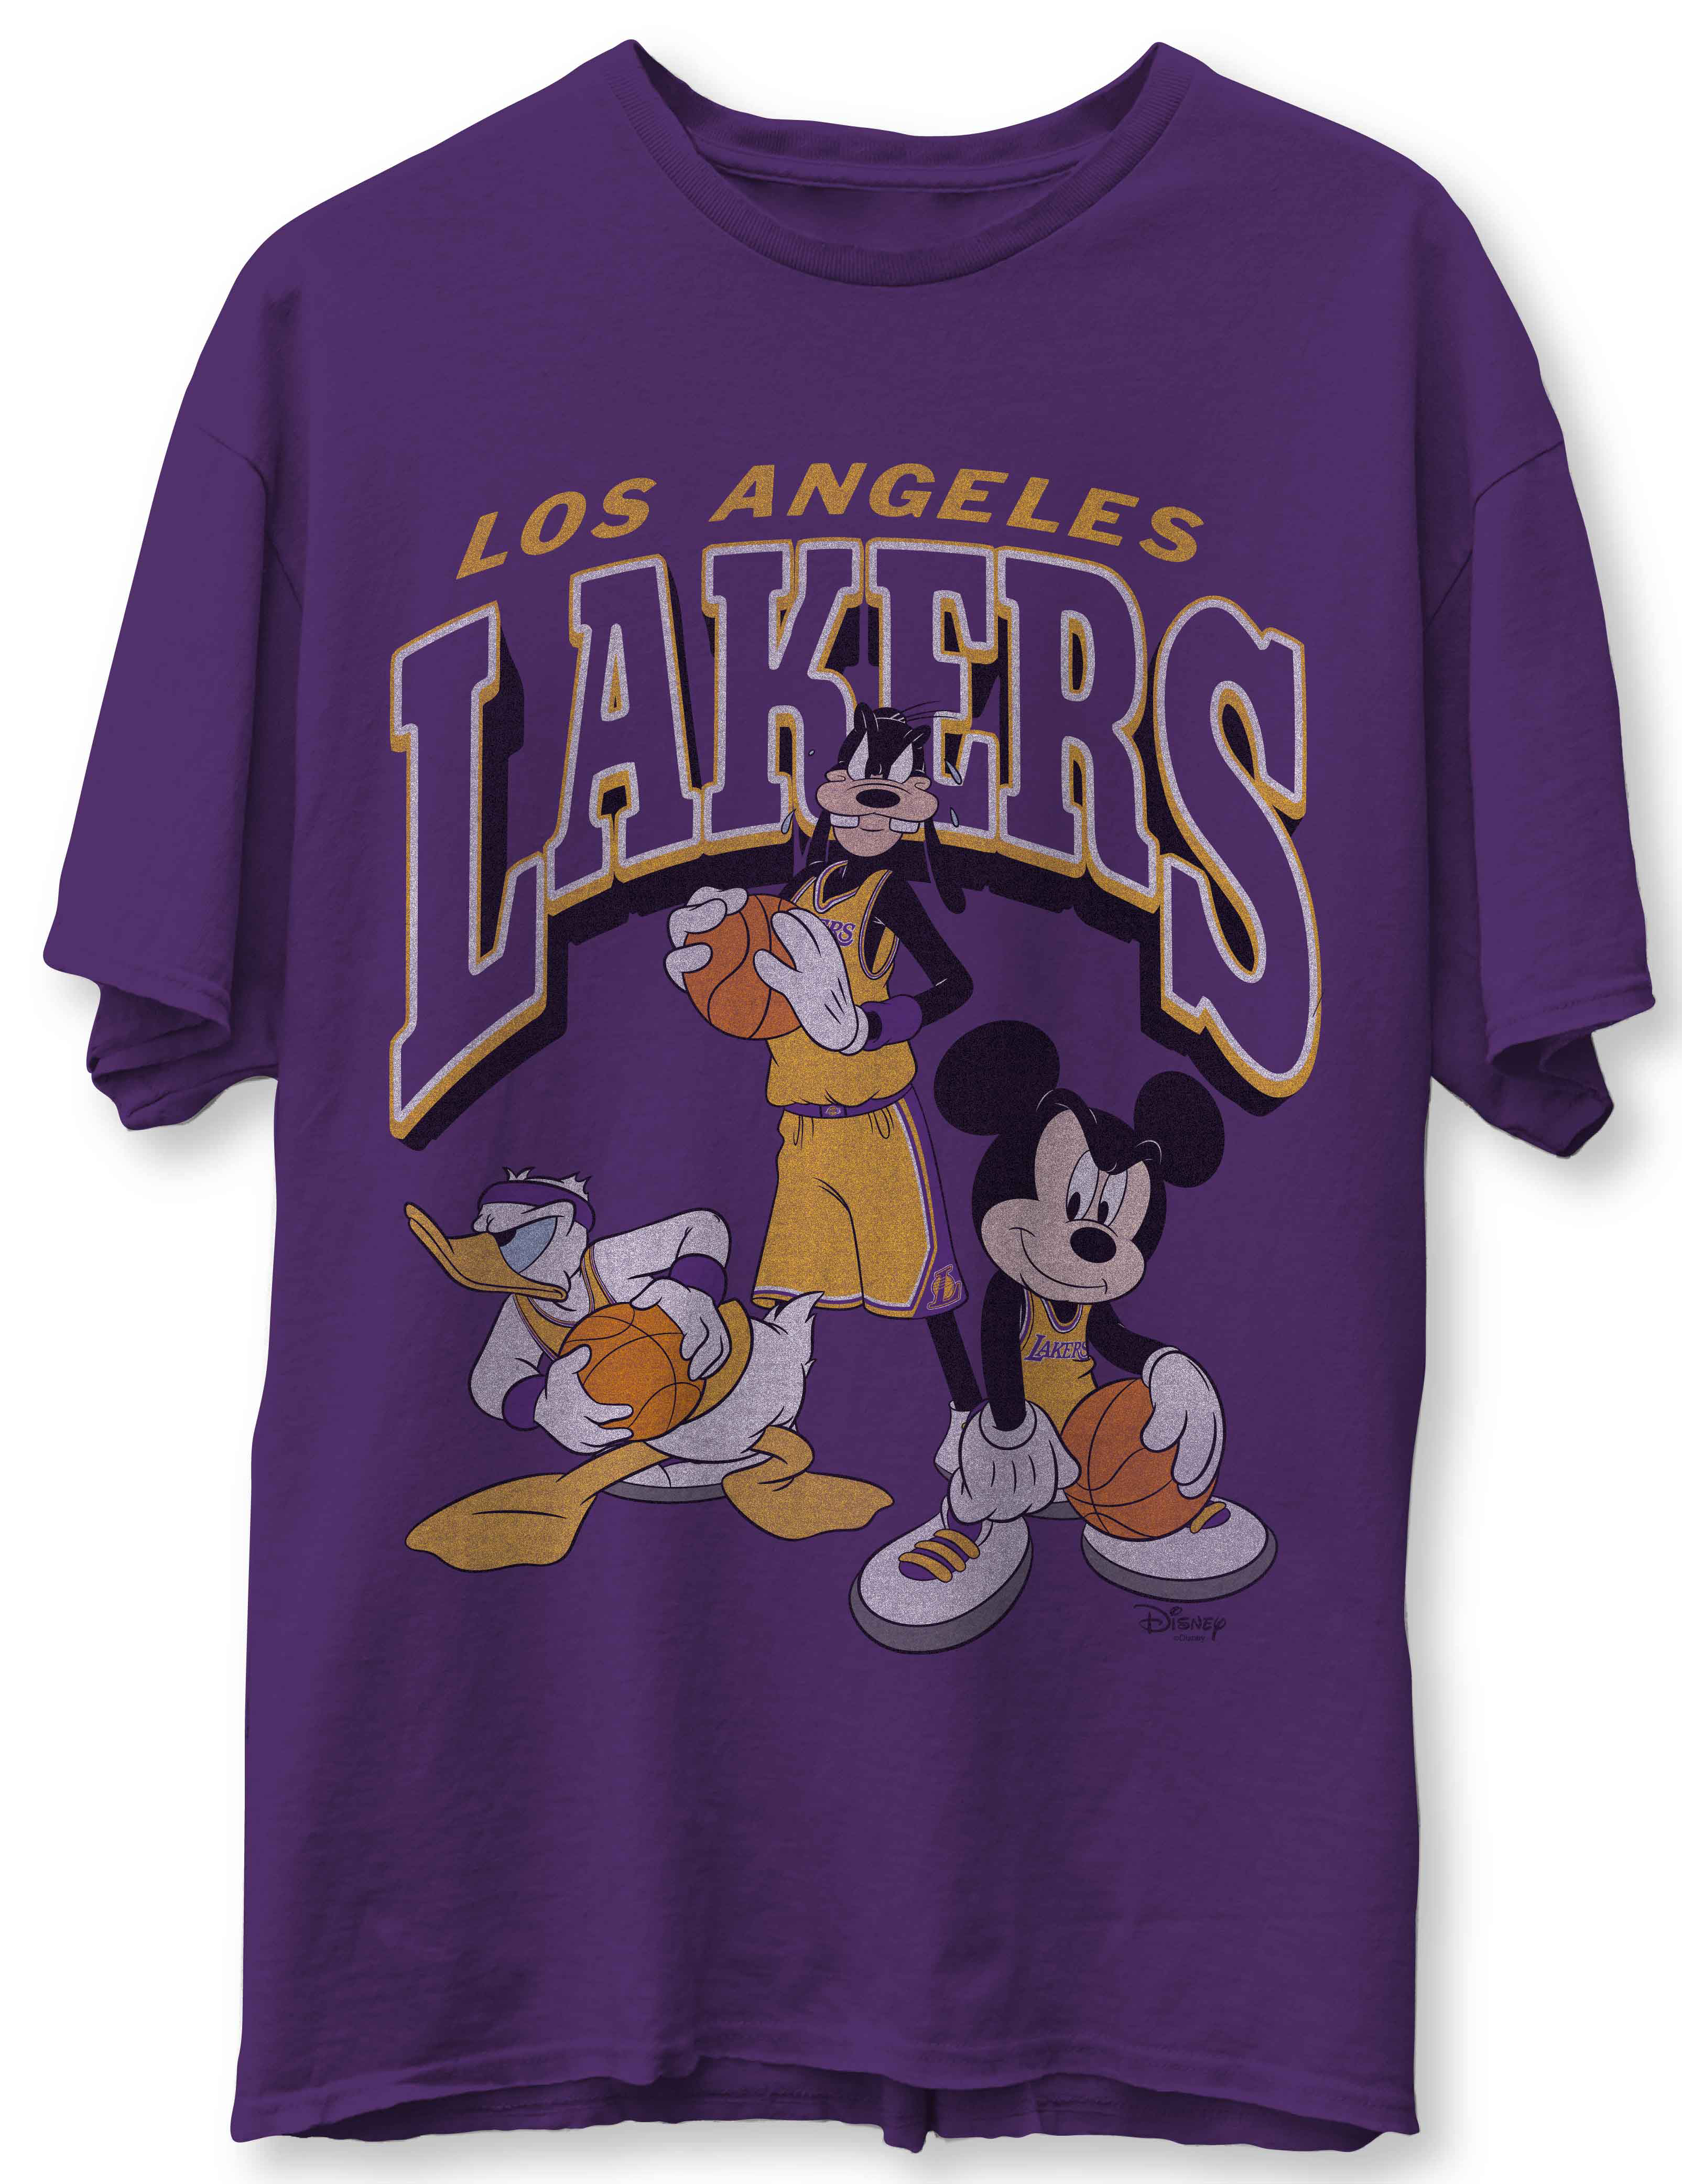 Junk Food, Disney Collabs With NBA for Vintage-Inspired T-Shirts